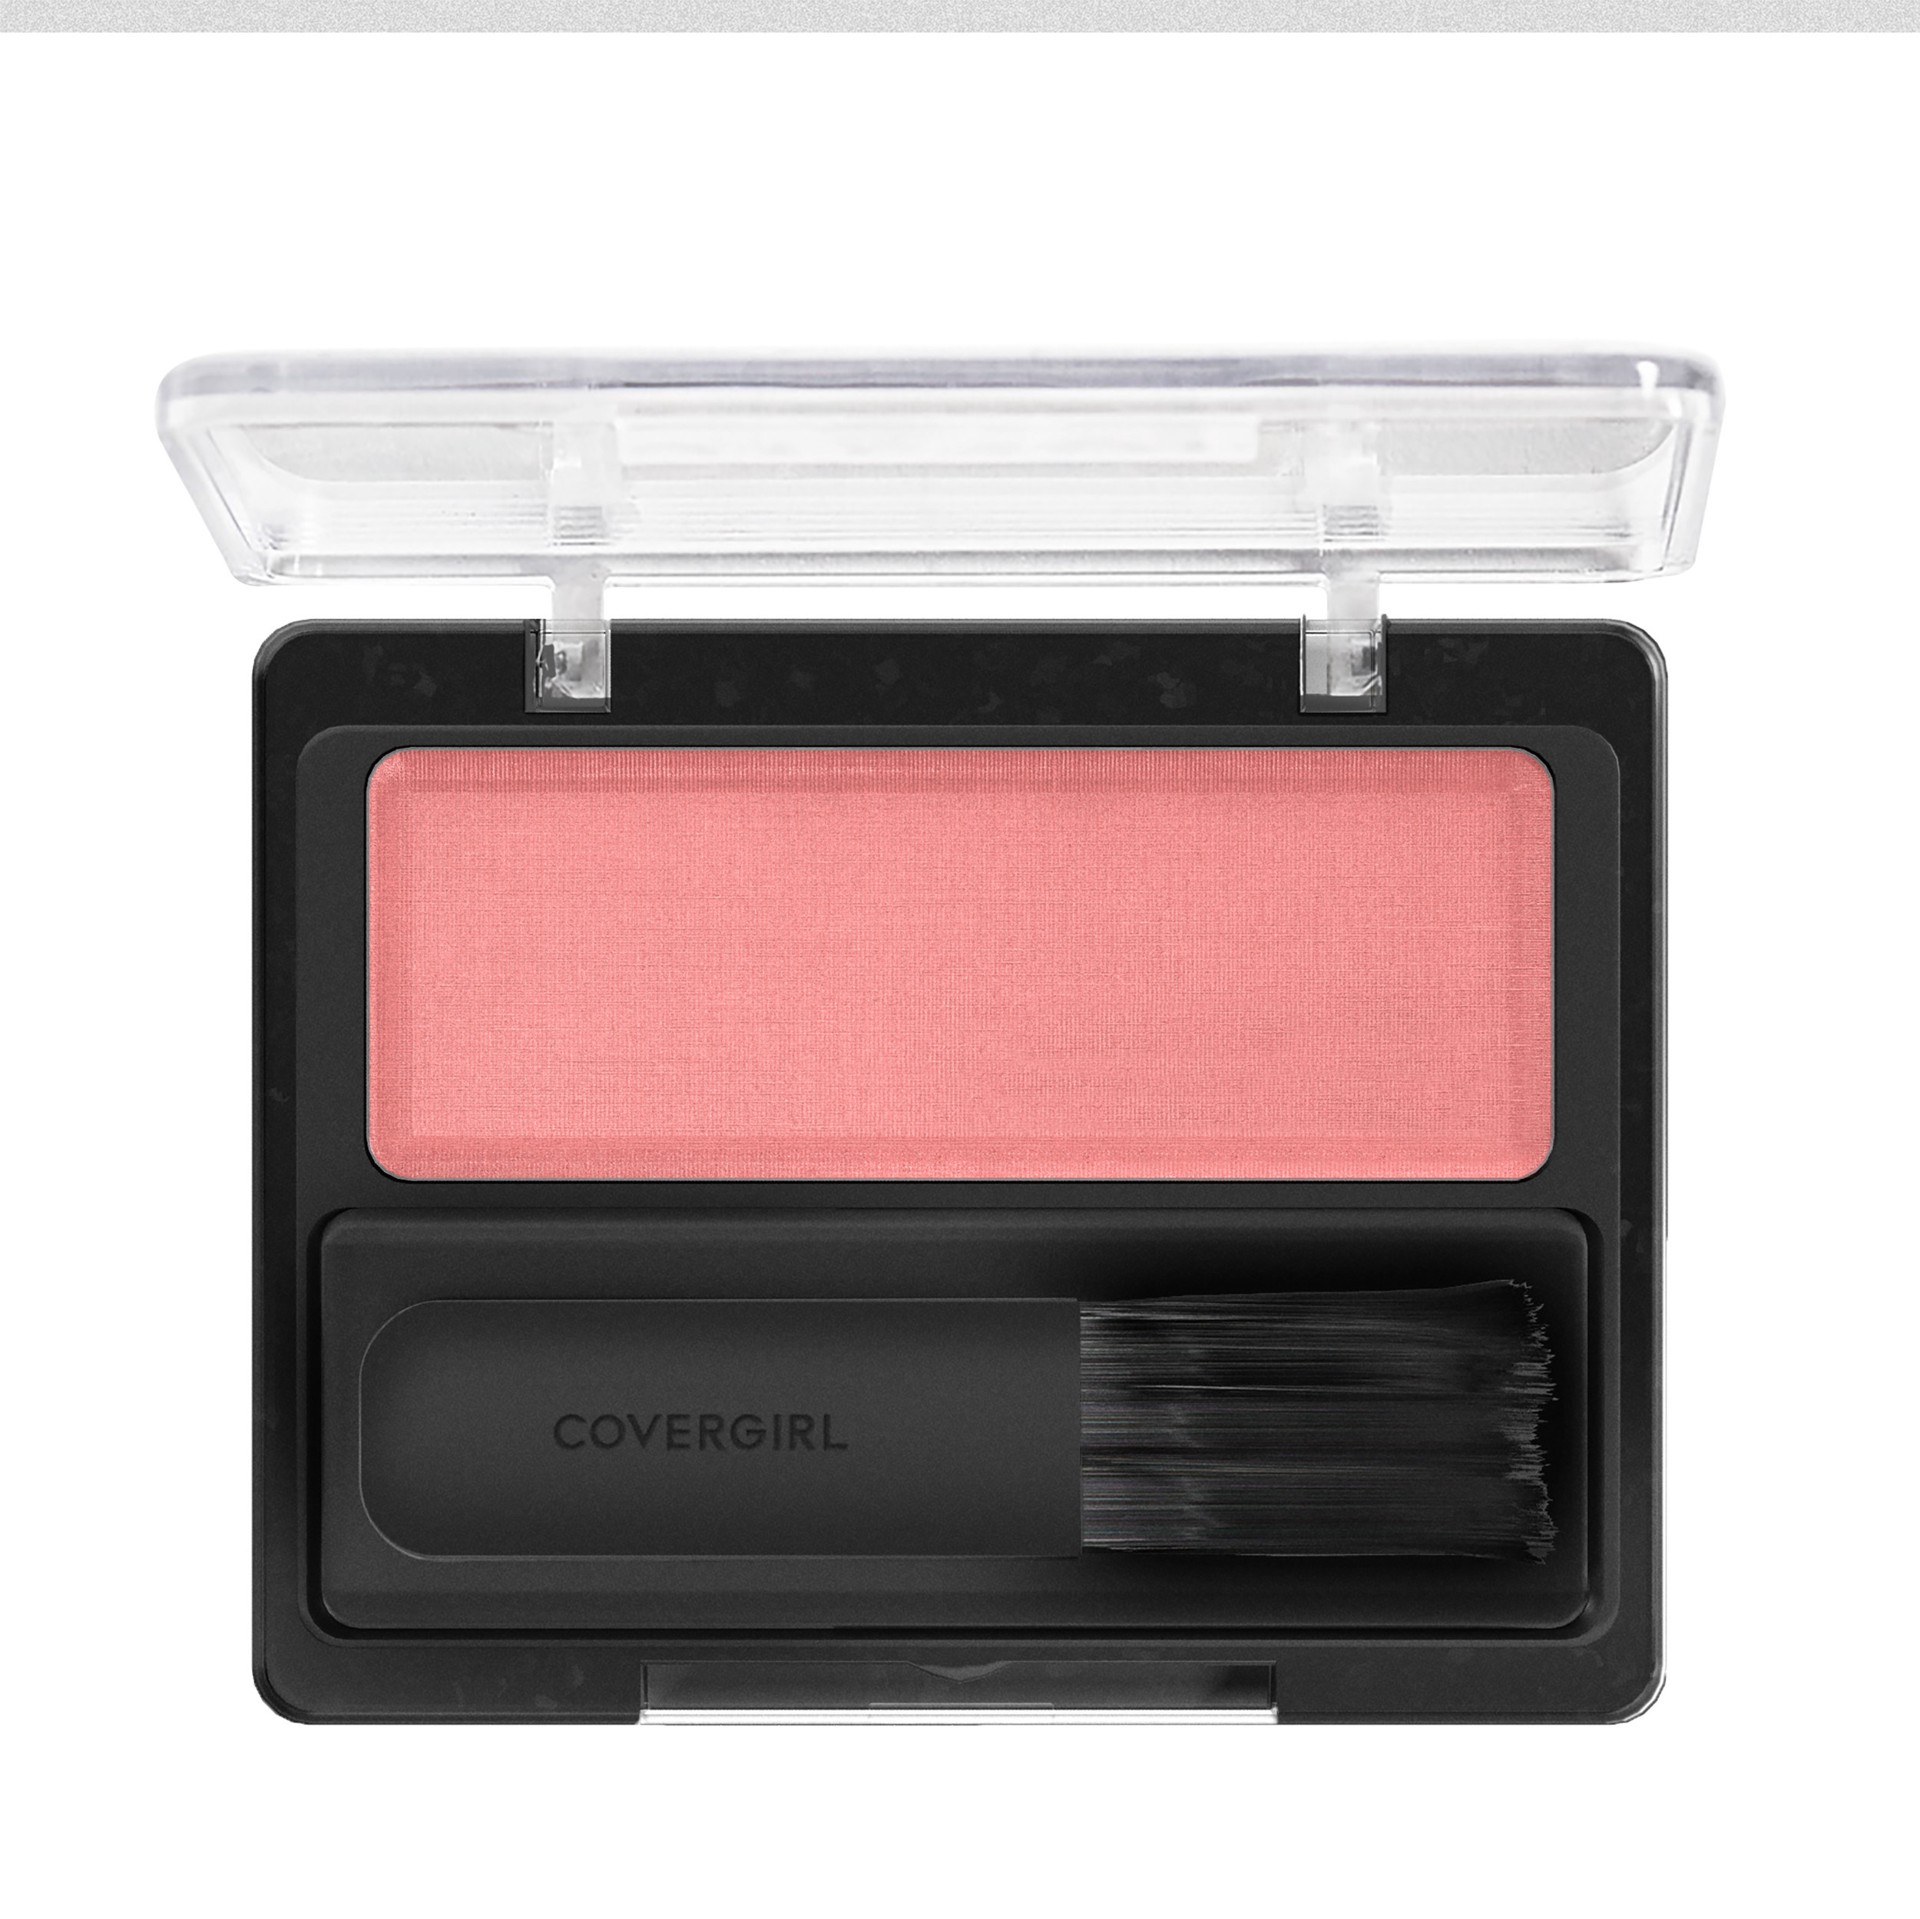 slide 1 of 42, Covergirl COVERGIRL Classic Color Blush Rose Silk, 1 ct